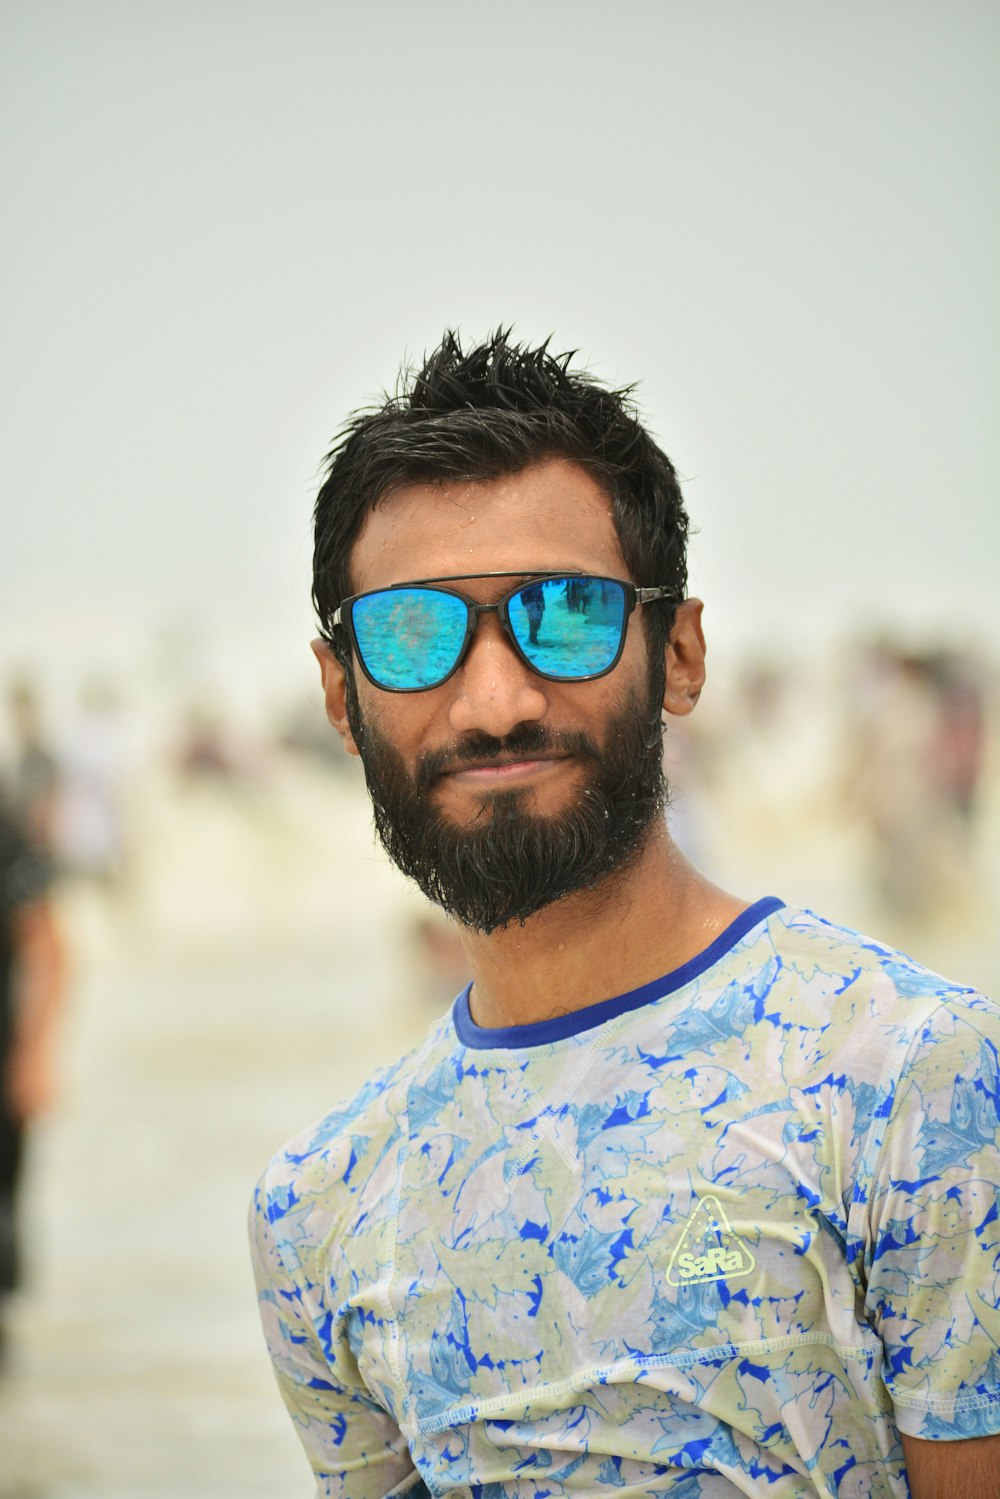 man in white and blue crew neck shirt wearing blue sunglasses